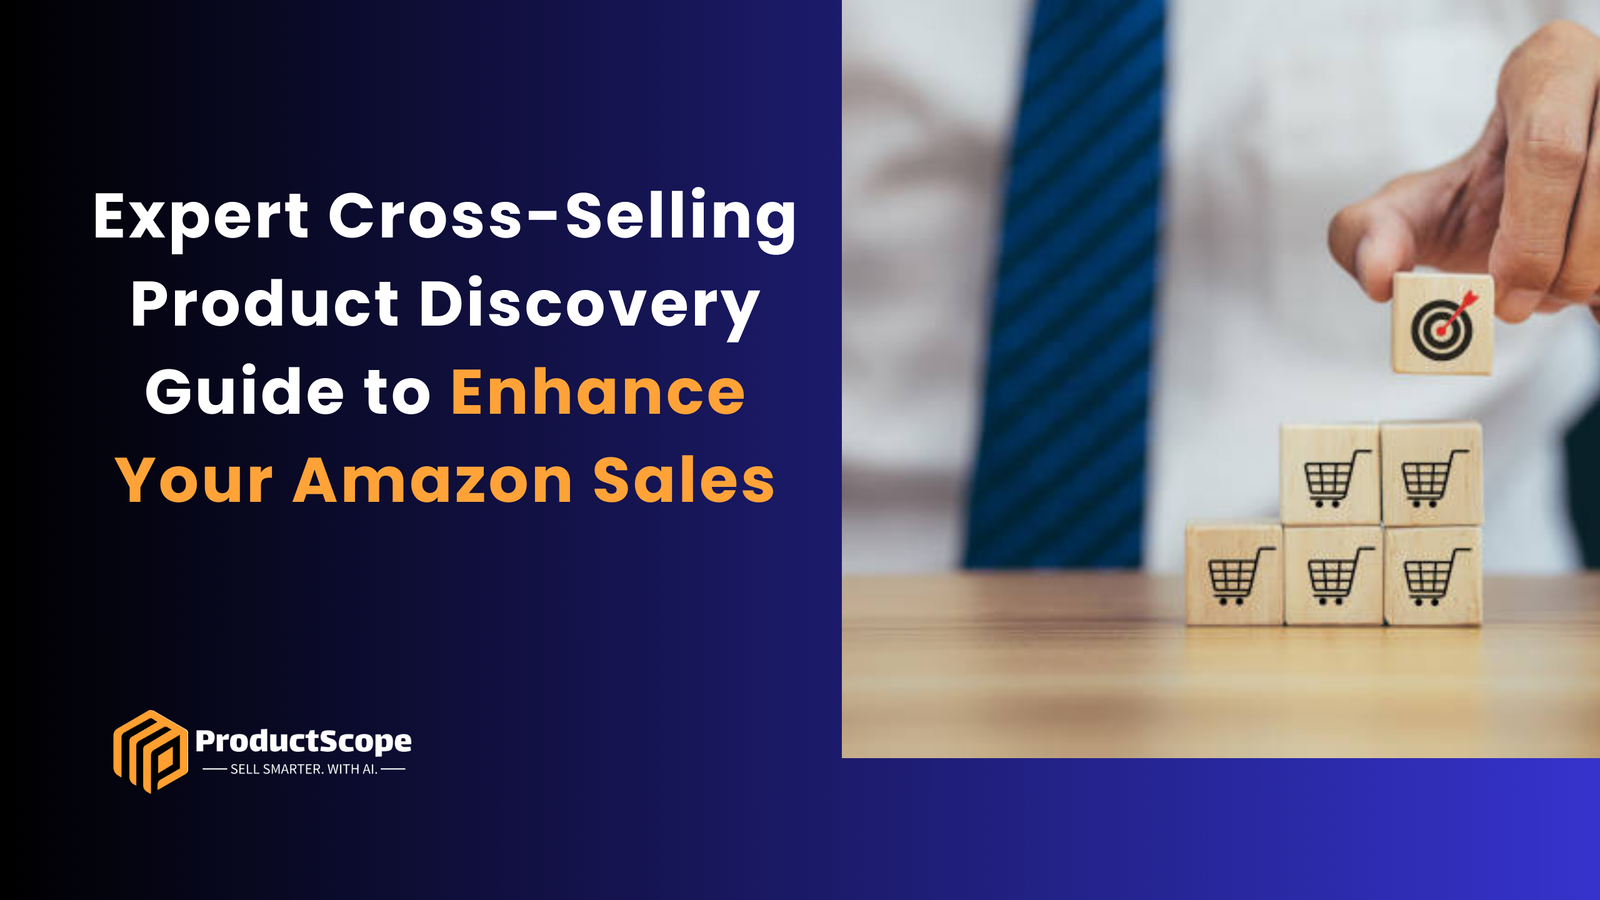 Expert Cross-Selling Product Discovery Guide to Enhance Your Amazon Sales